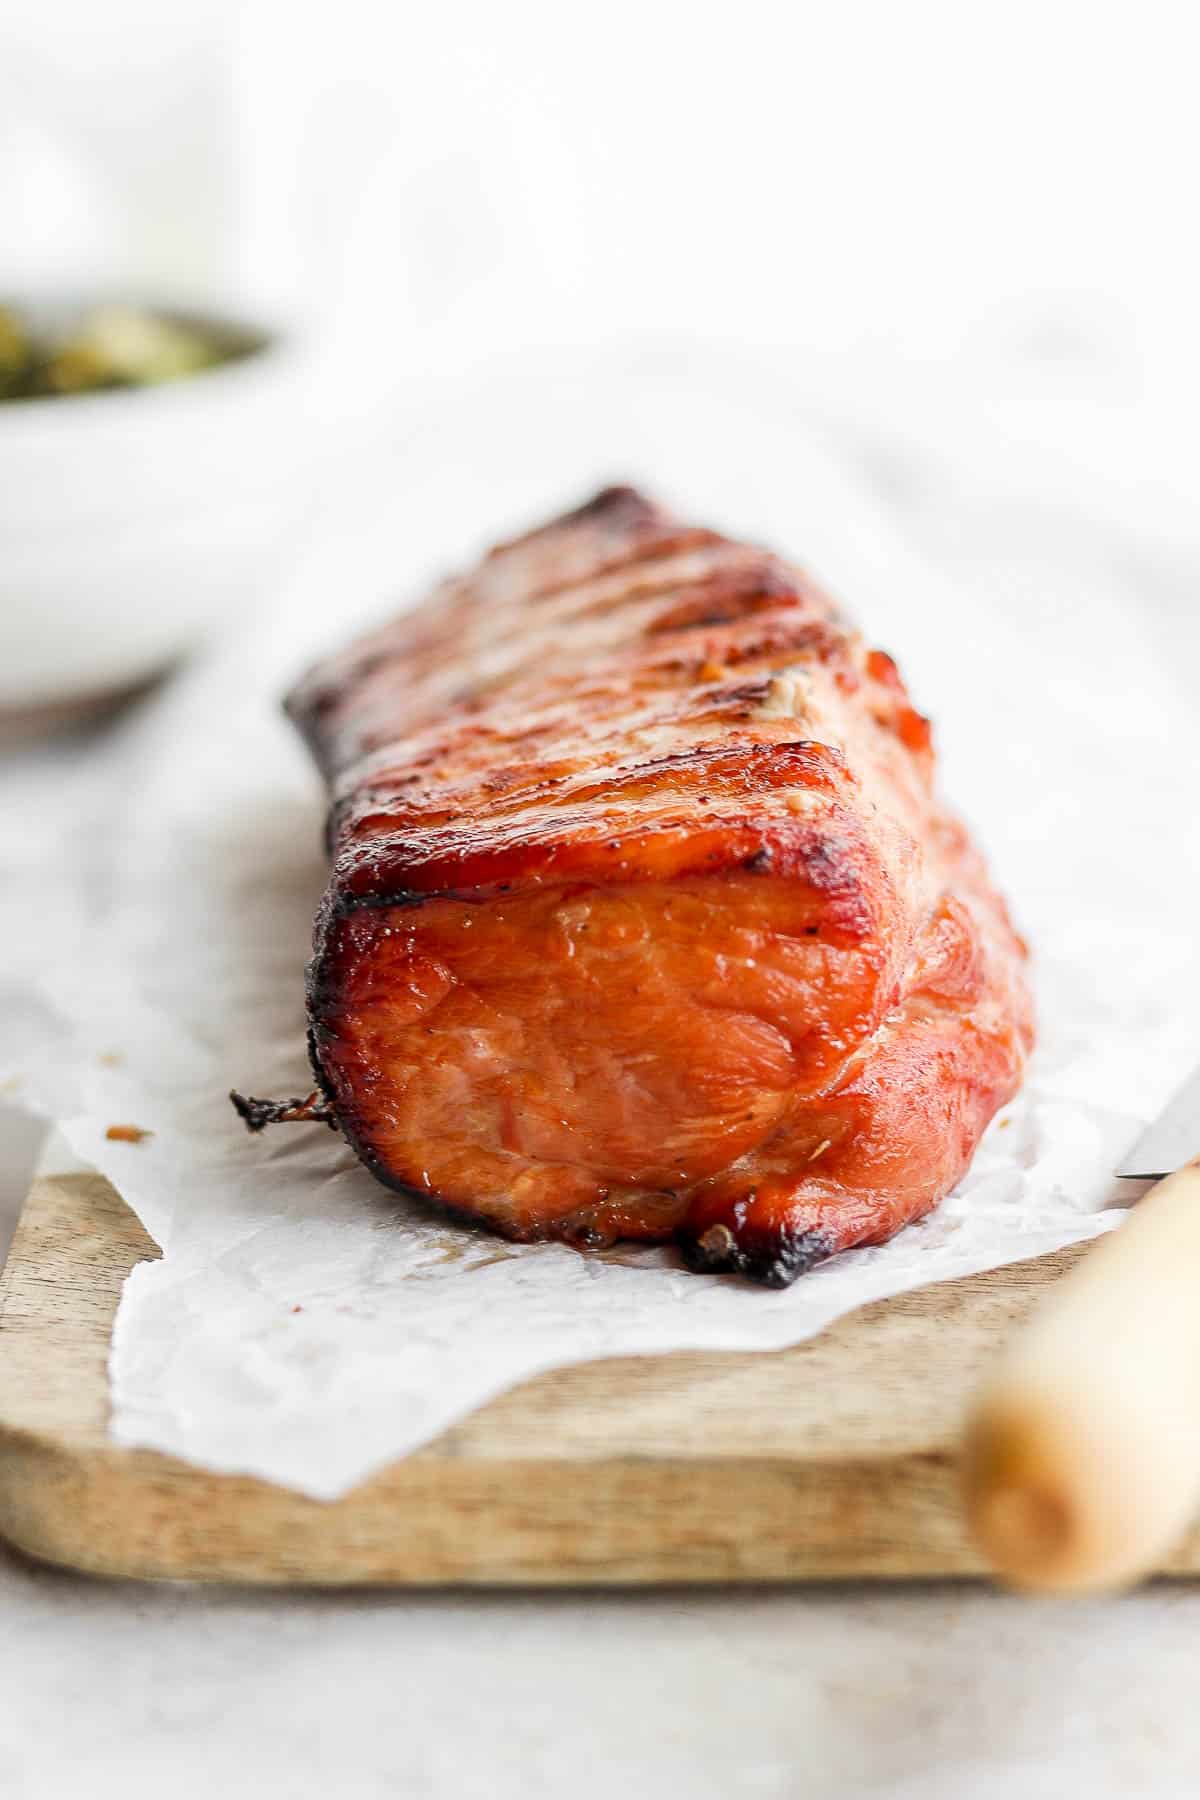 A smoked pork loin on a piece of parchment showing the charred end.